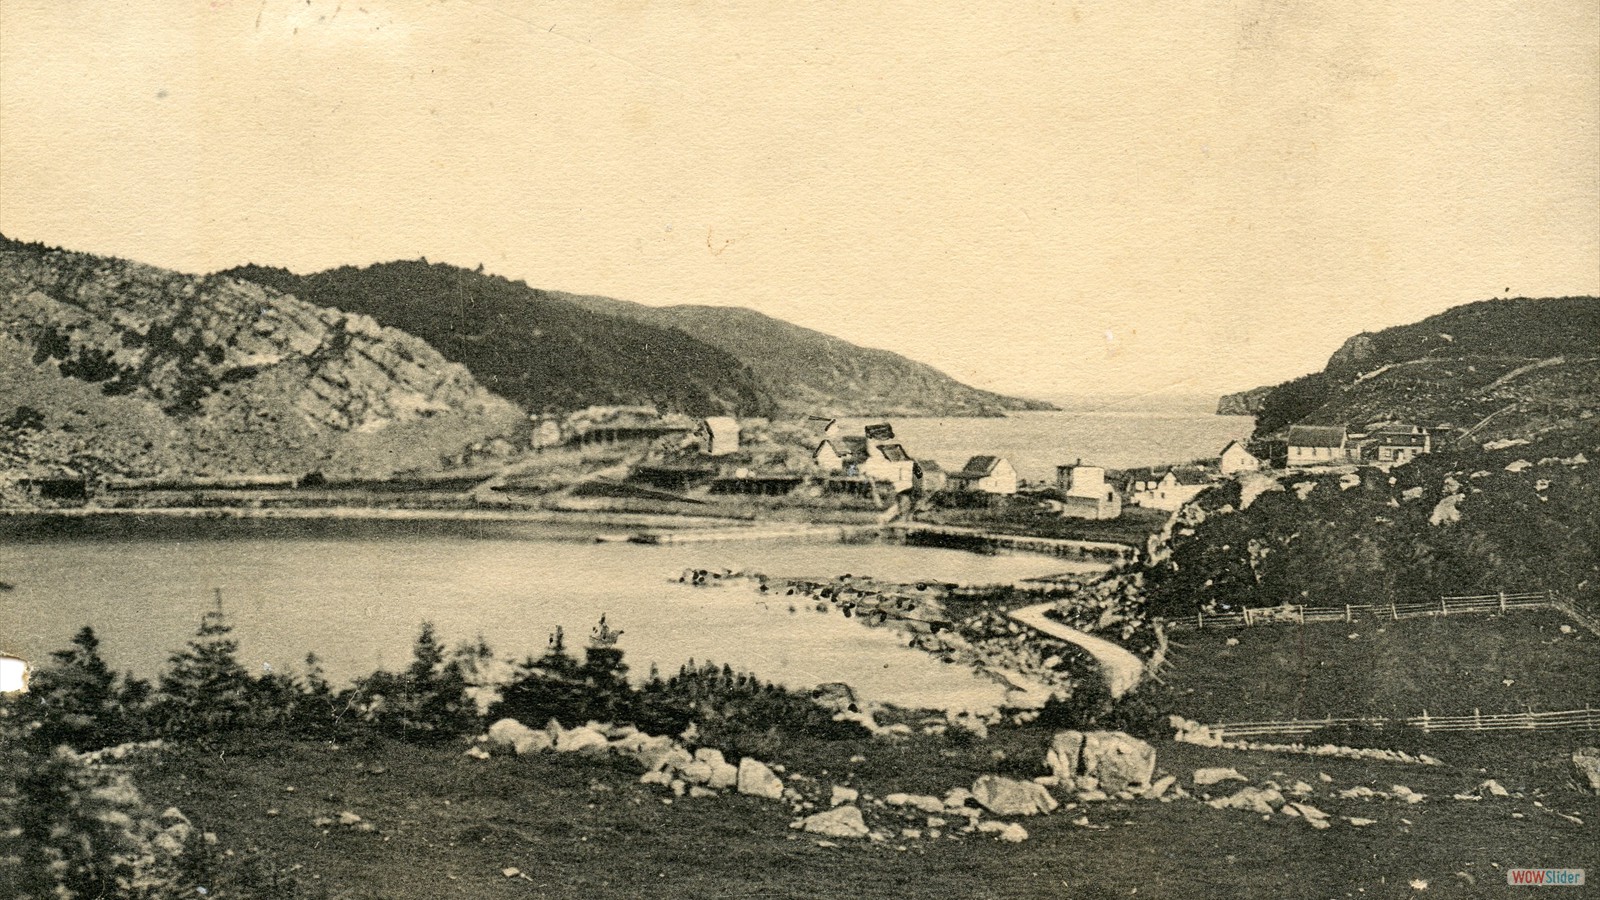 Cuckold's Cove, later named Dunfield